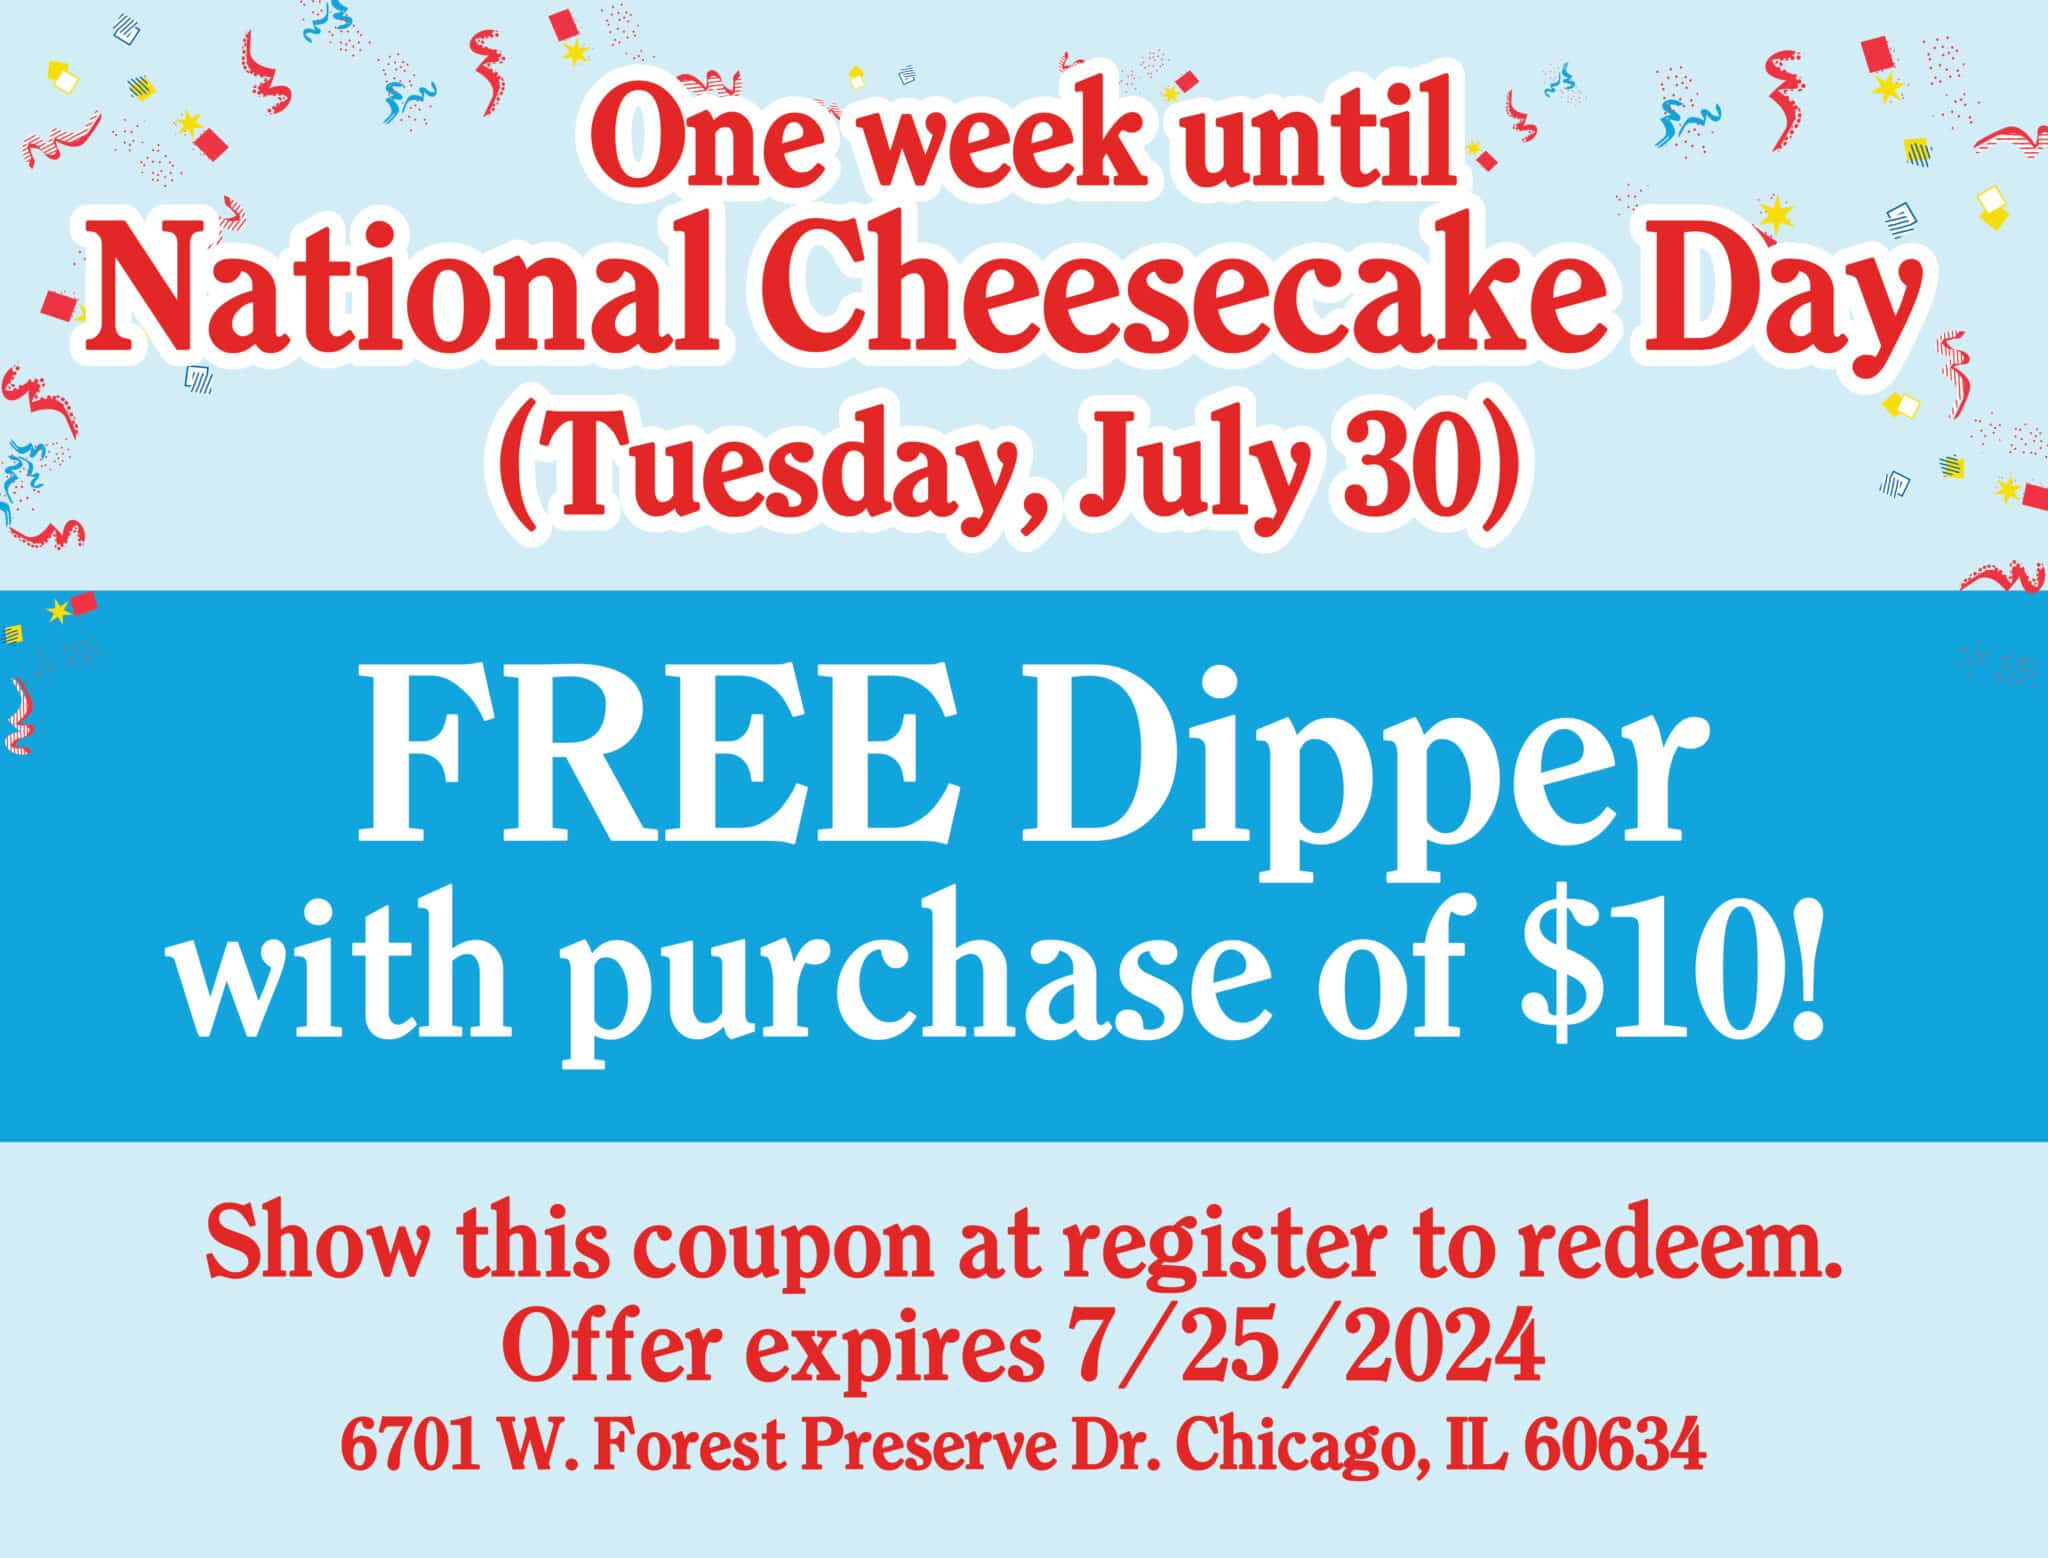 One week until National Cheesecake Day, Tuesday, July 30th! Celebrate with a FREE Dipper with purchase of $10! Show this coupon at register to redeem. Expires 7/25/2024.